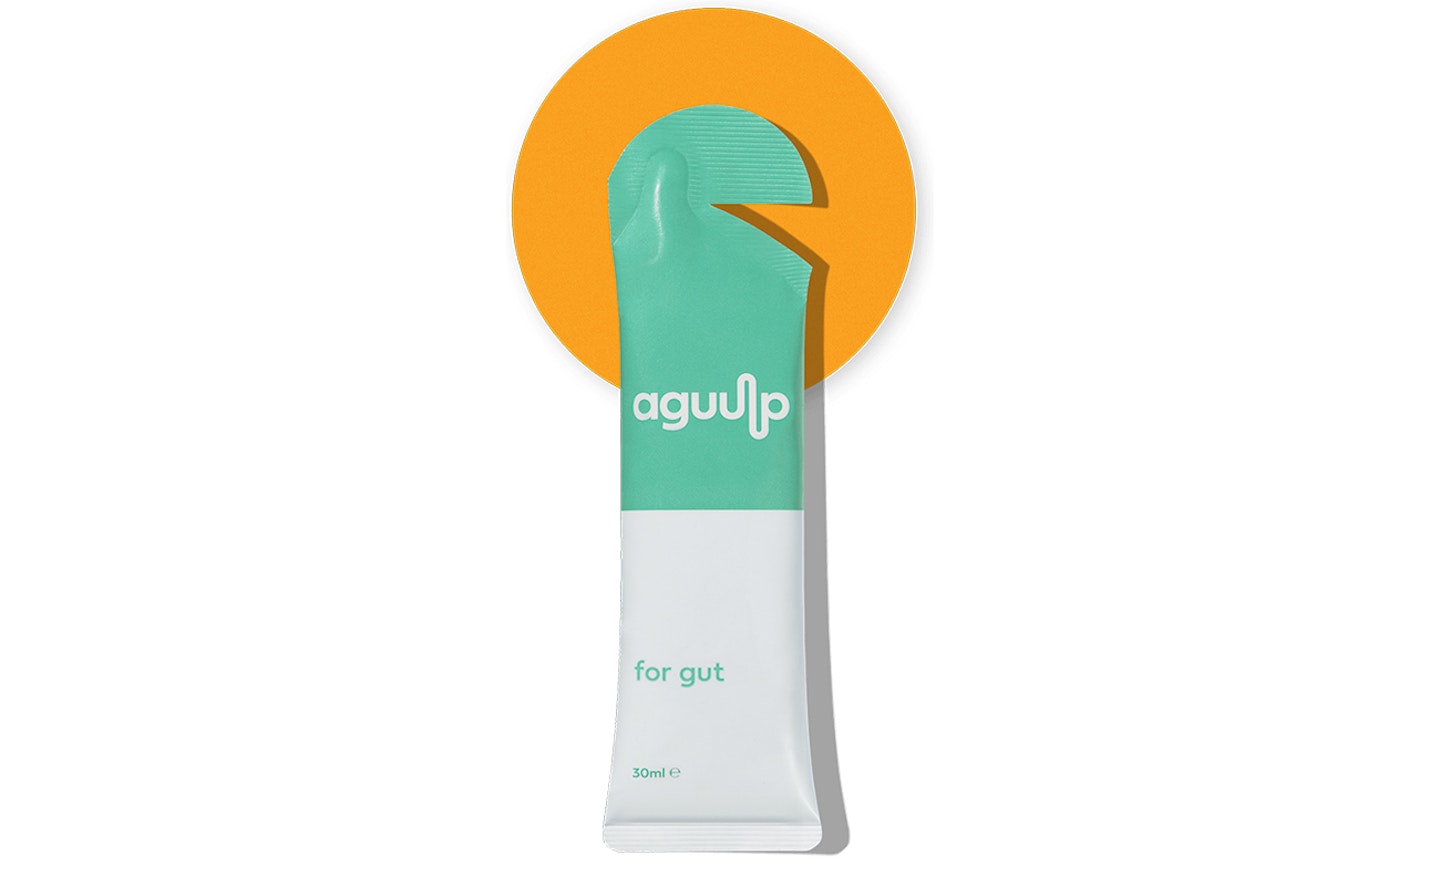 Aguulp for Gut